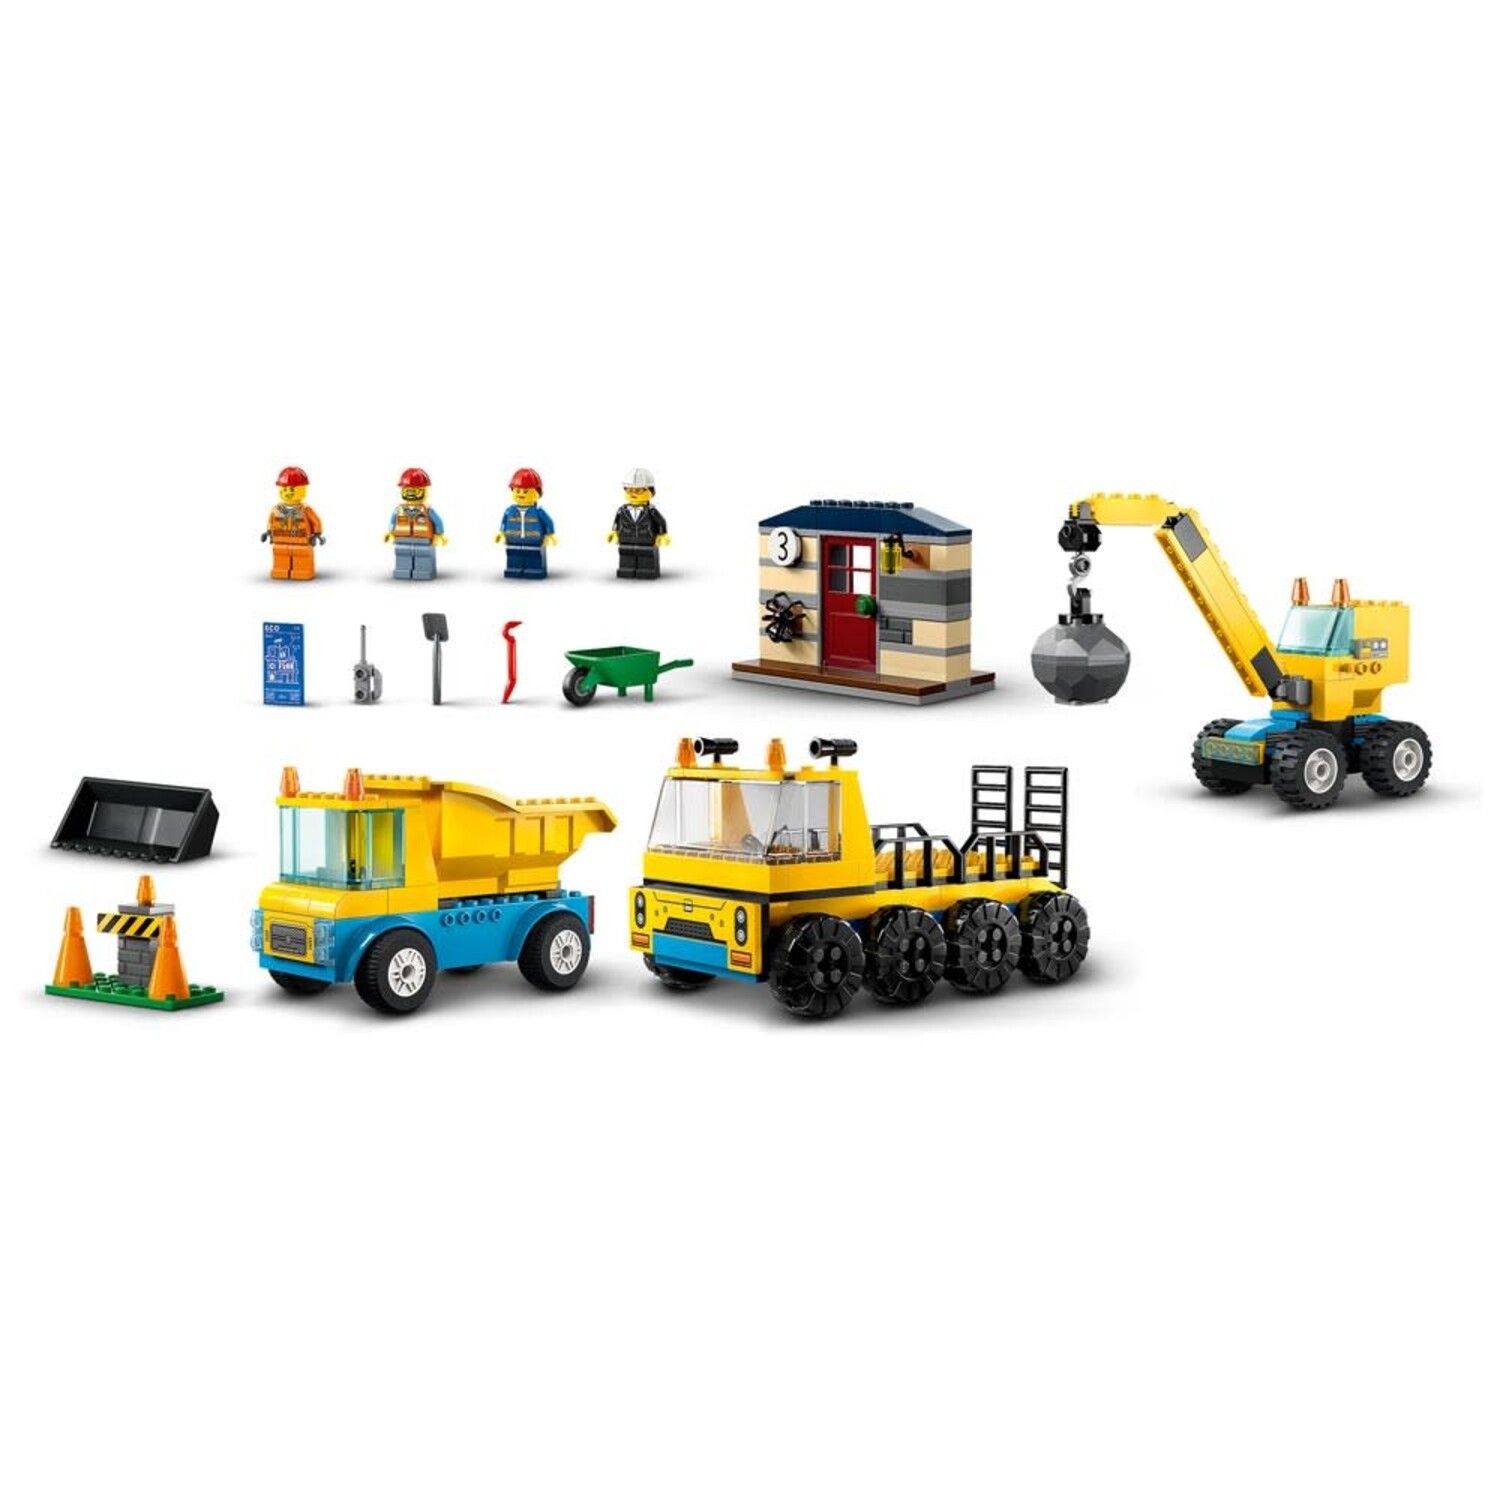 Construction Trucks and Wrecking Ball Crane LEGO City - Mudpuddles Toys and  Books